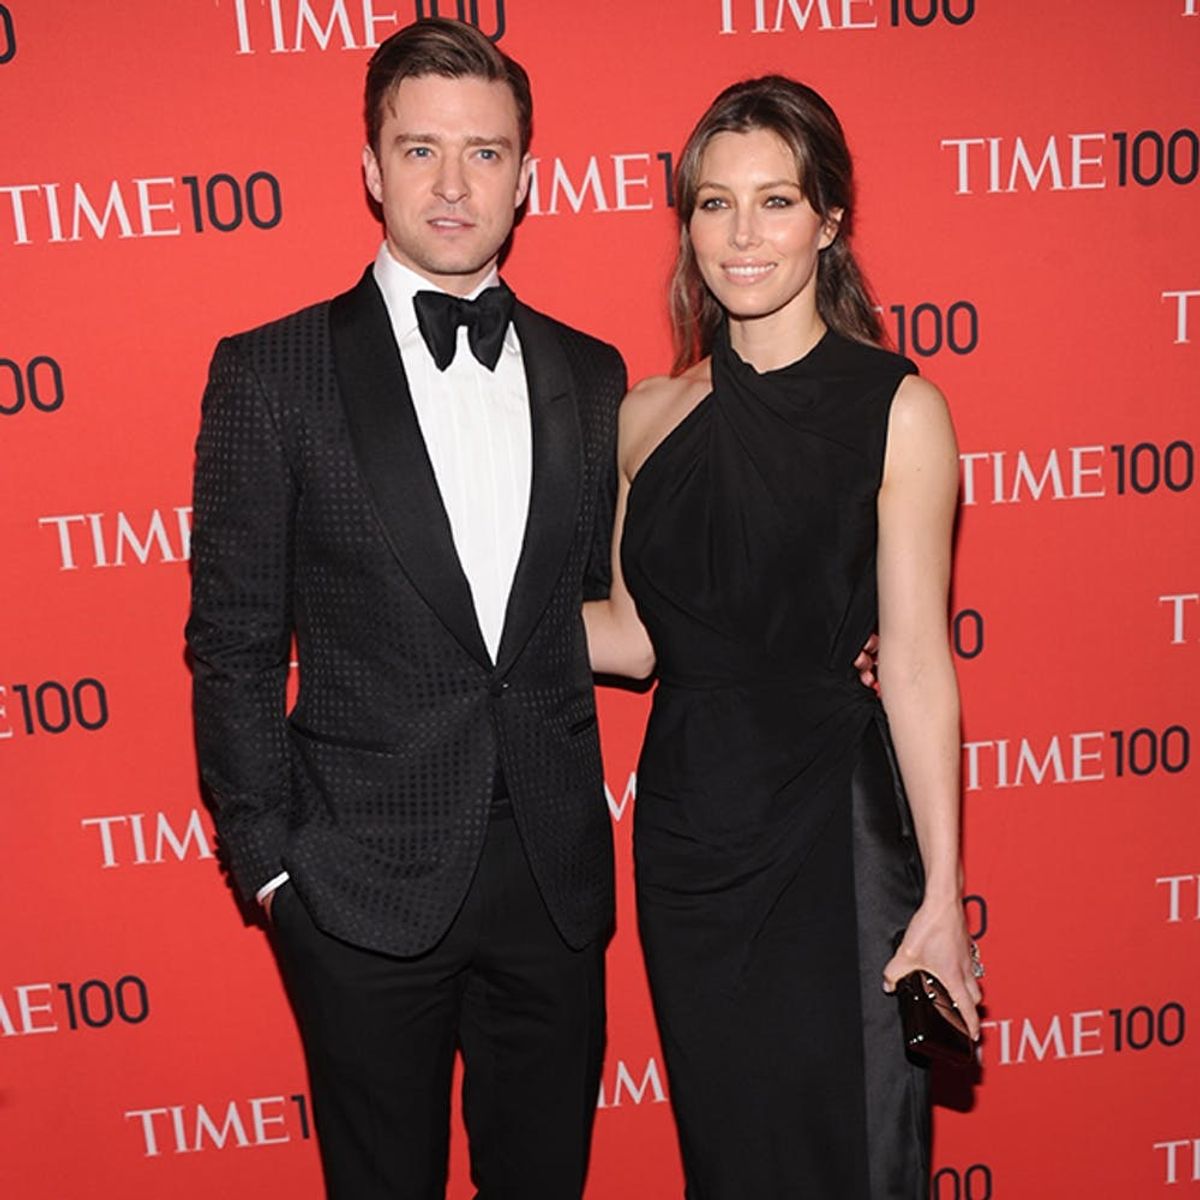 The First Pic of Jessica Biel + Justin Timberlake’s Son Will Melt Your Heart